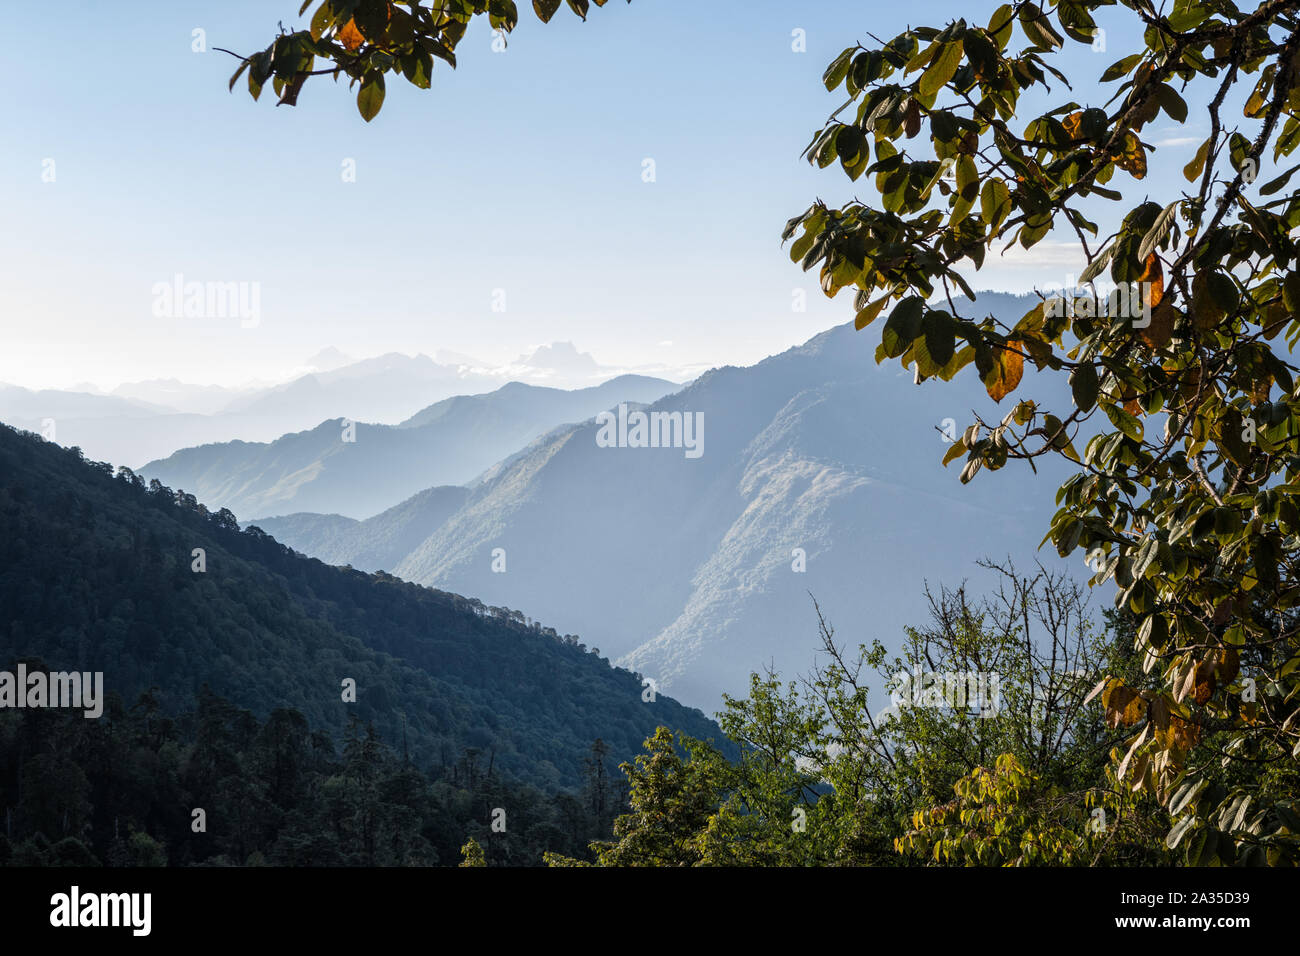 Mountains and valleys in the region of Punakha, Bhutan Stock Photo